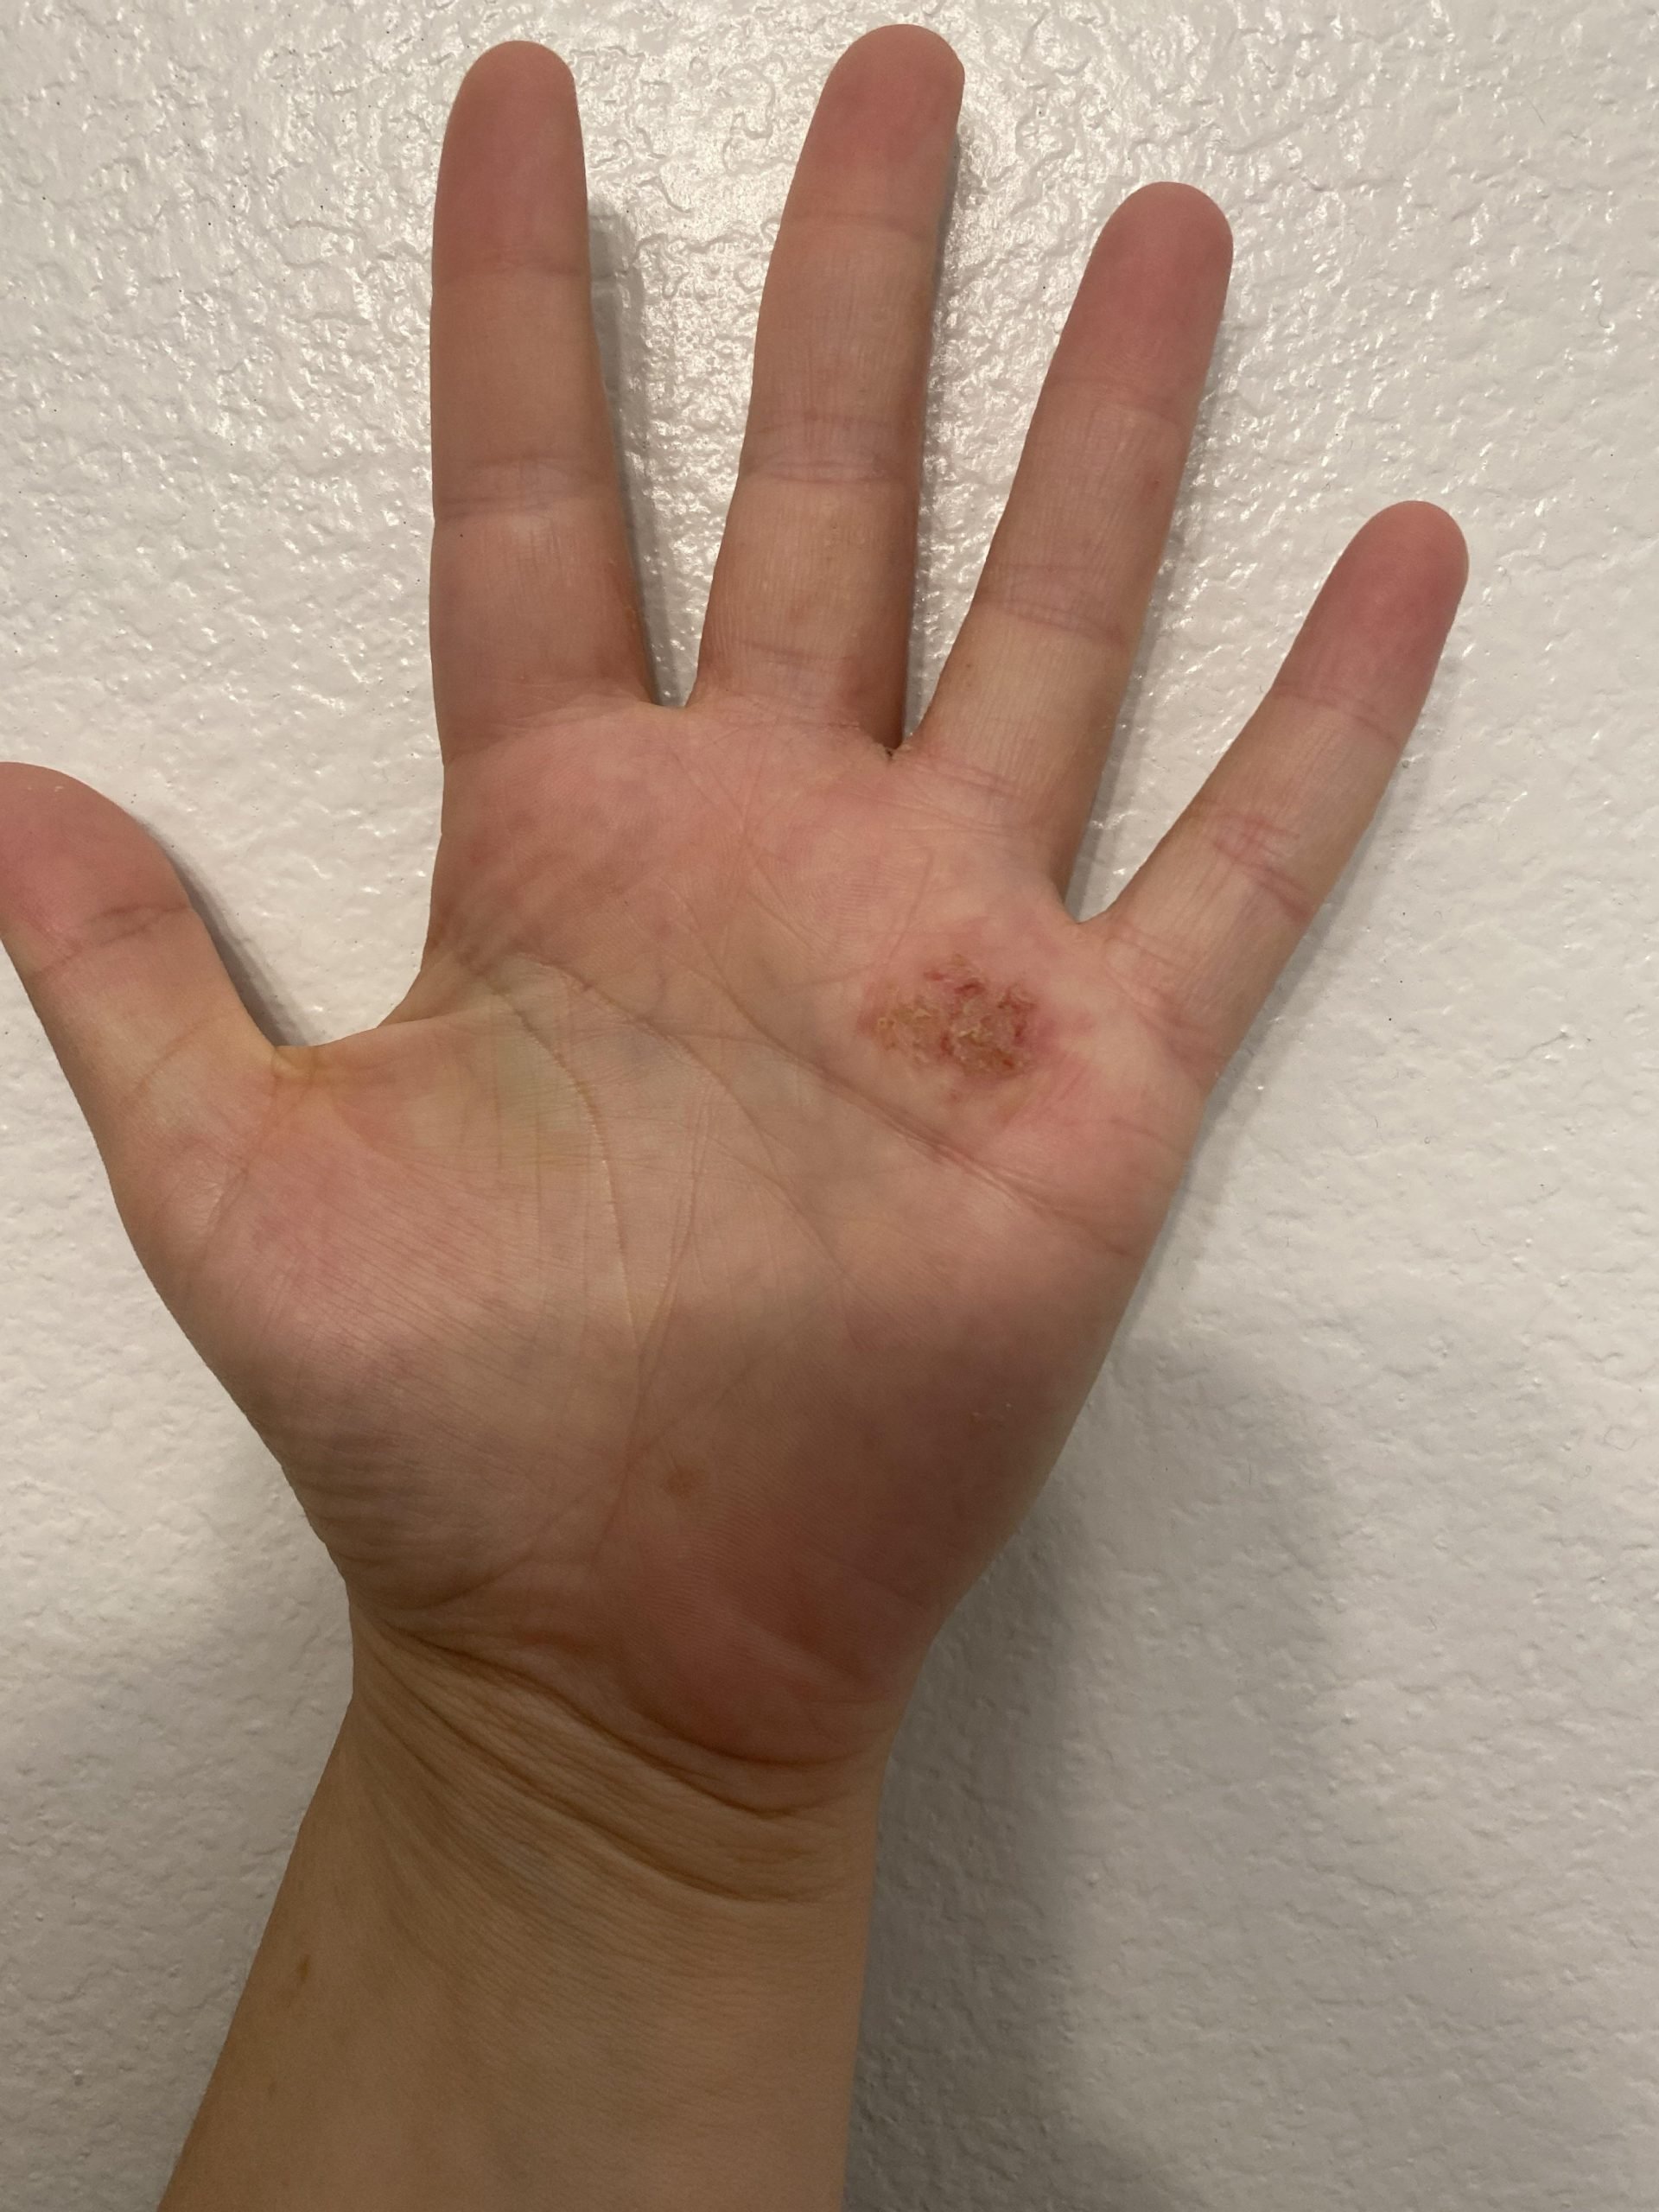 Grateful I found this sub. i was in eczema but this seems ...